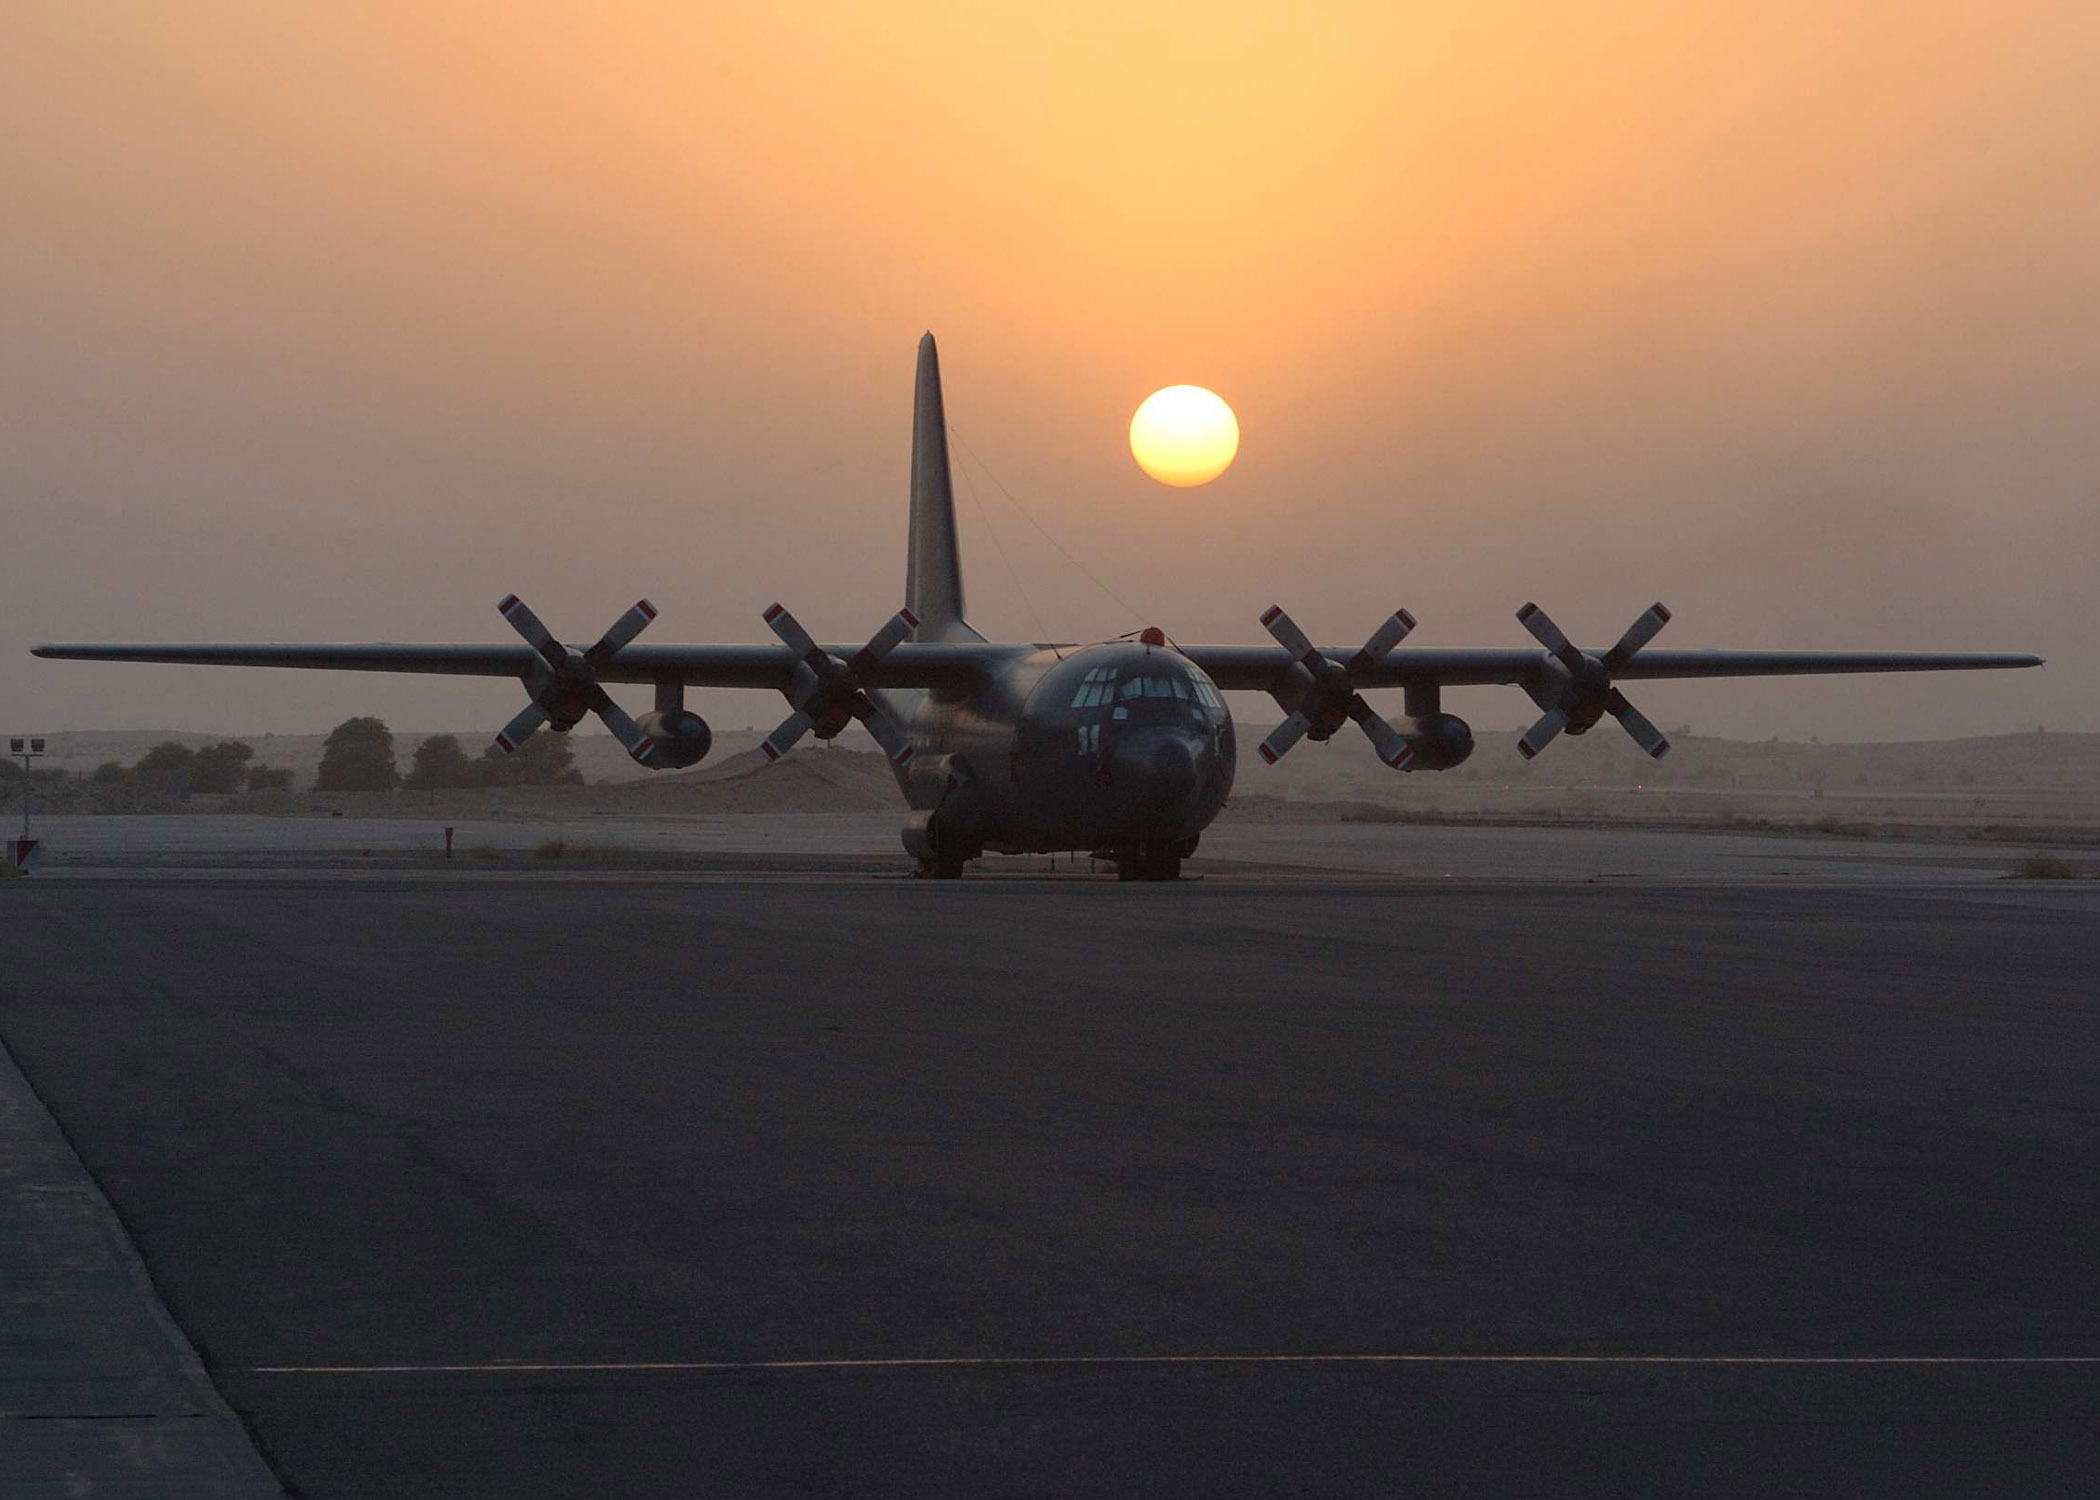 A big four-engine propeller aircraft sits on the tarmac while the sun sets behind it.